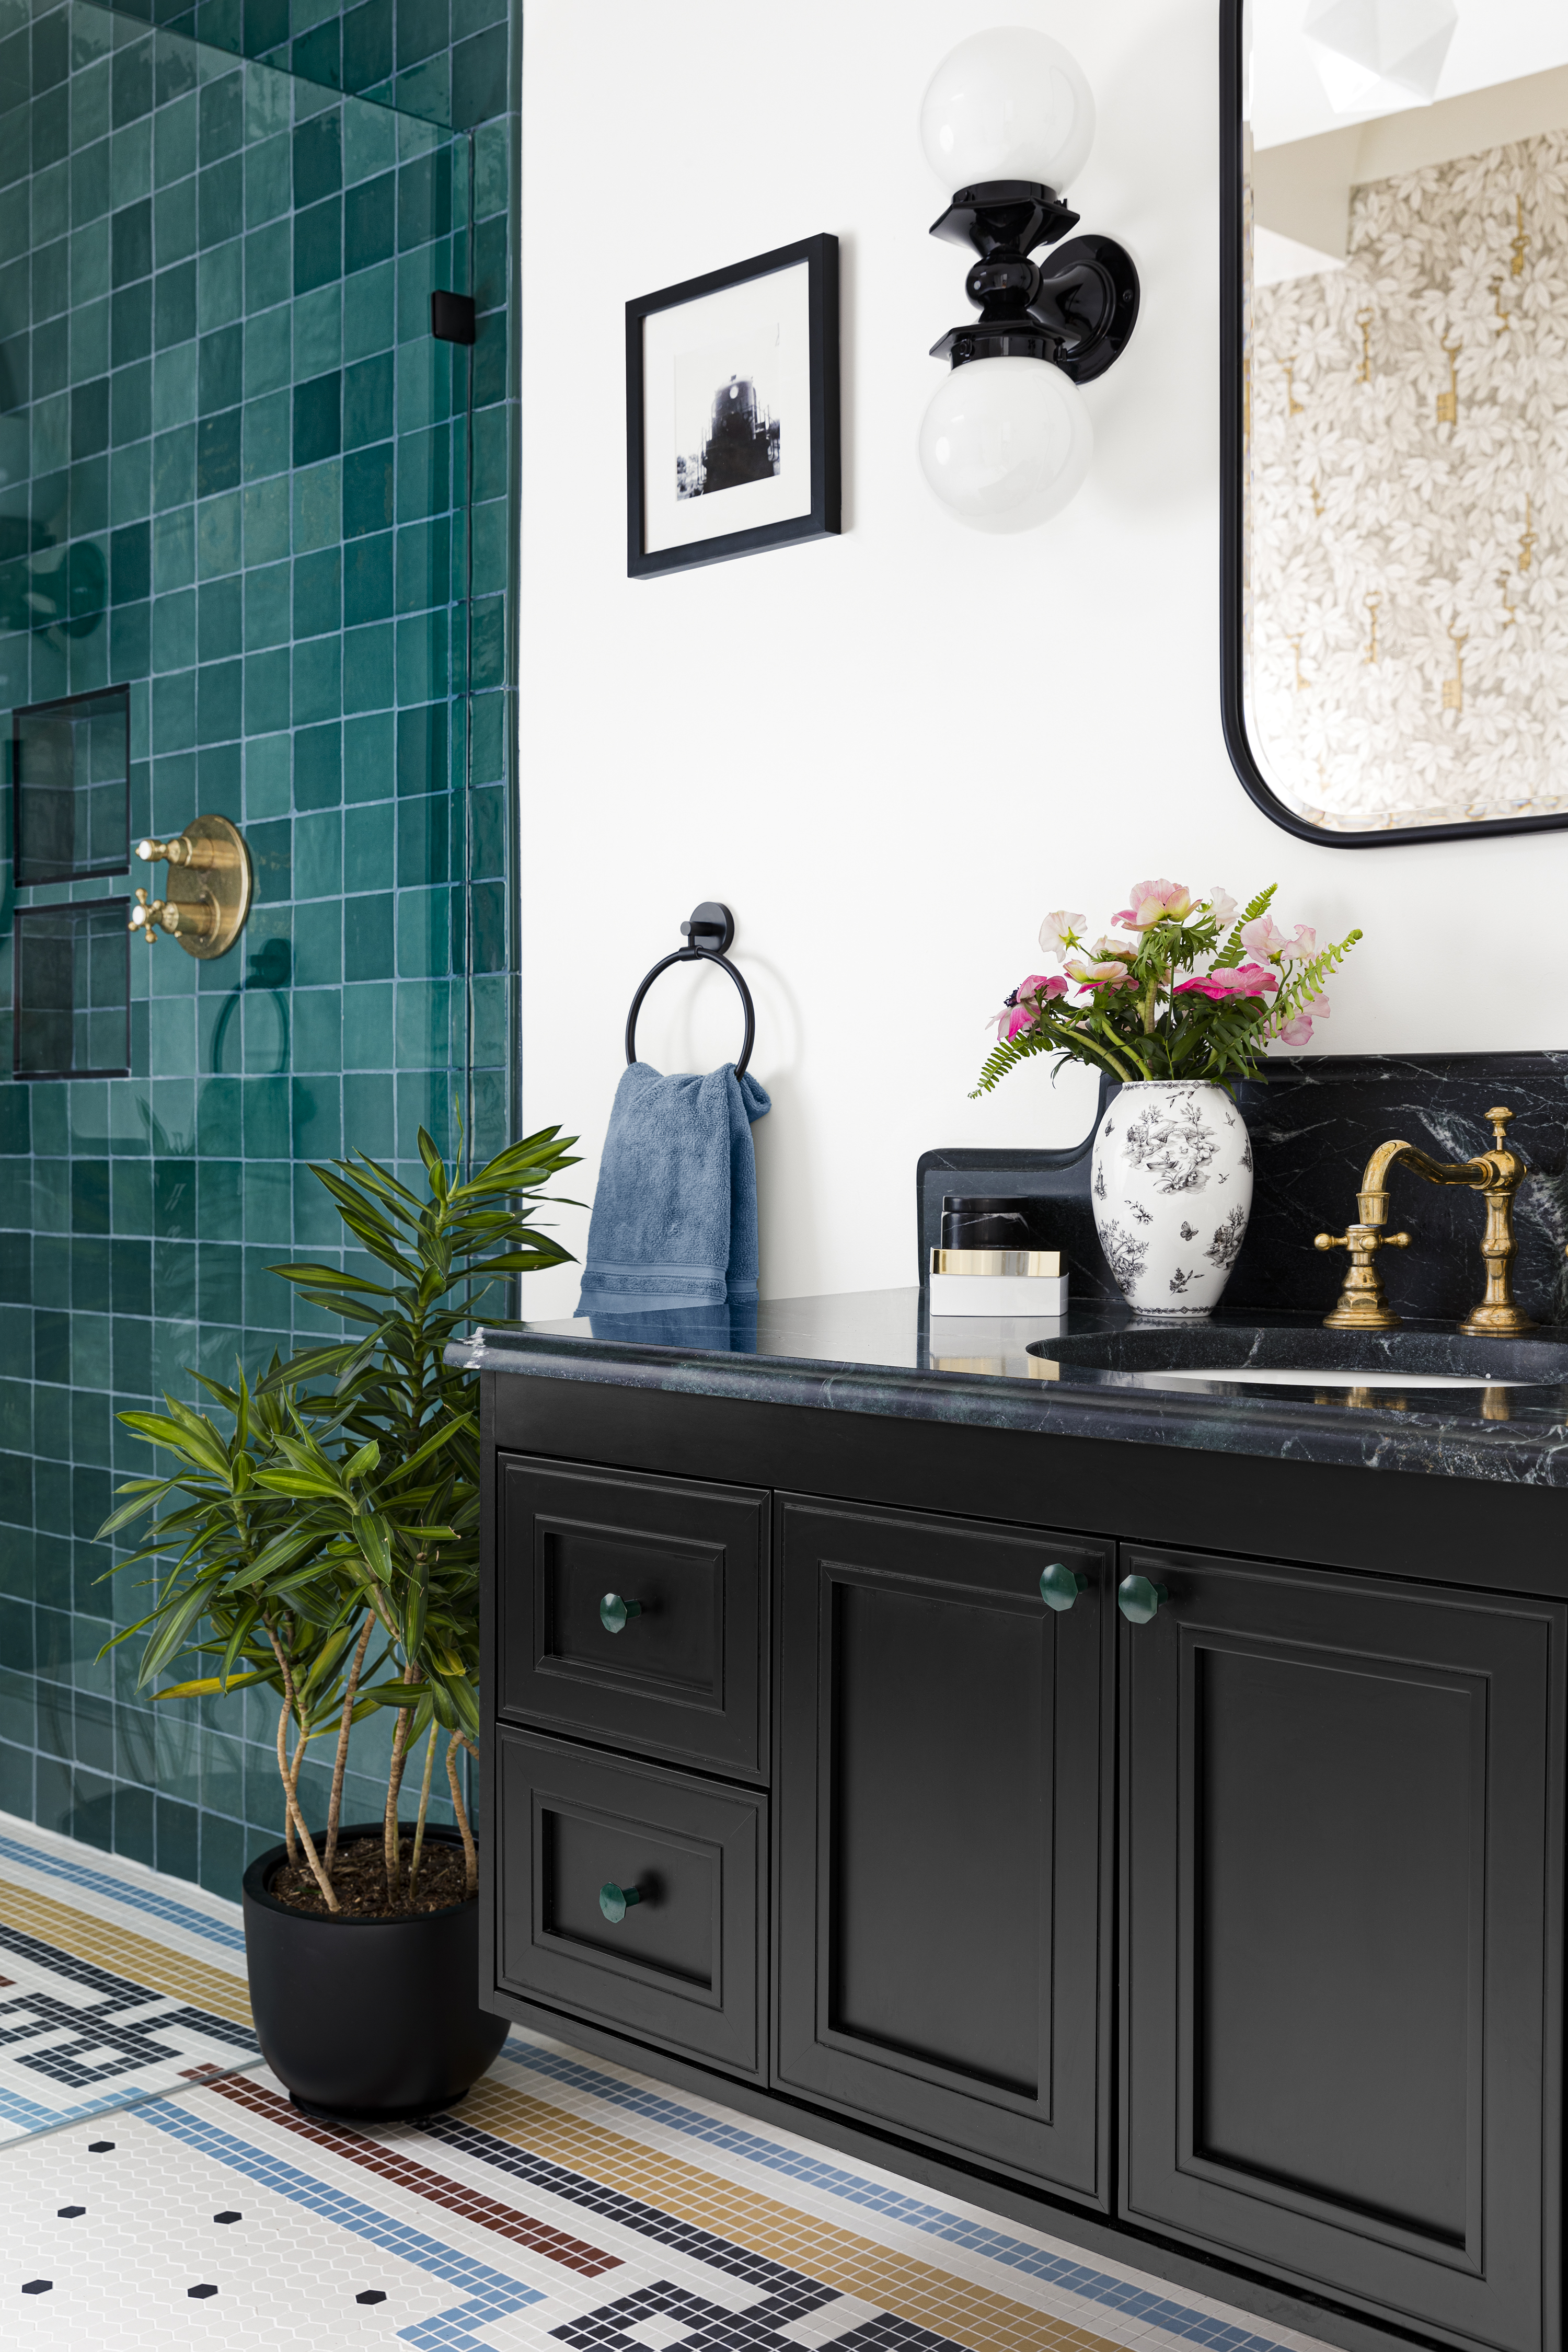 Designer Cecilia Casagrande commissioned a tile company to re-create a section of floor from an old photo of Seattle’s Union Station for this bathroom redesign.